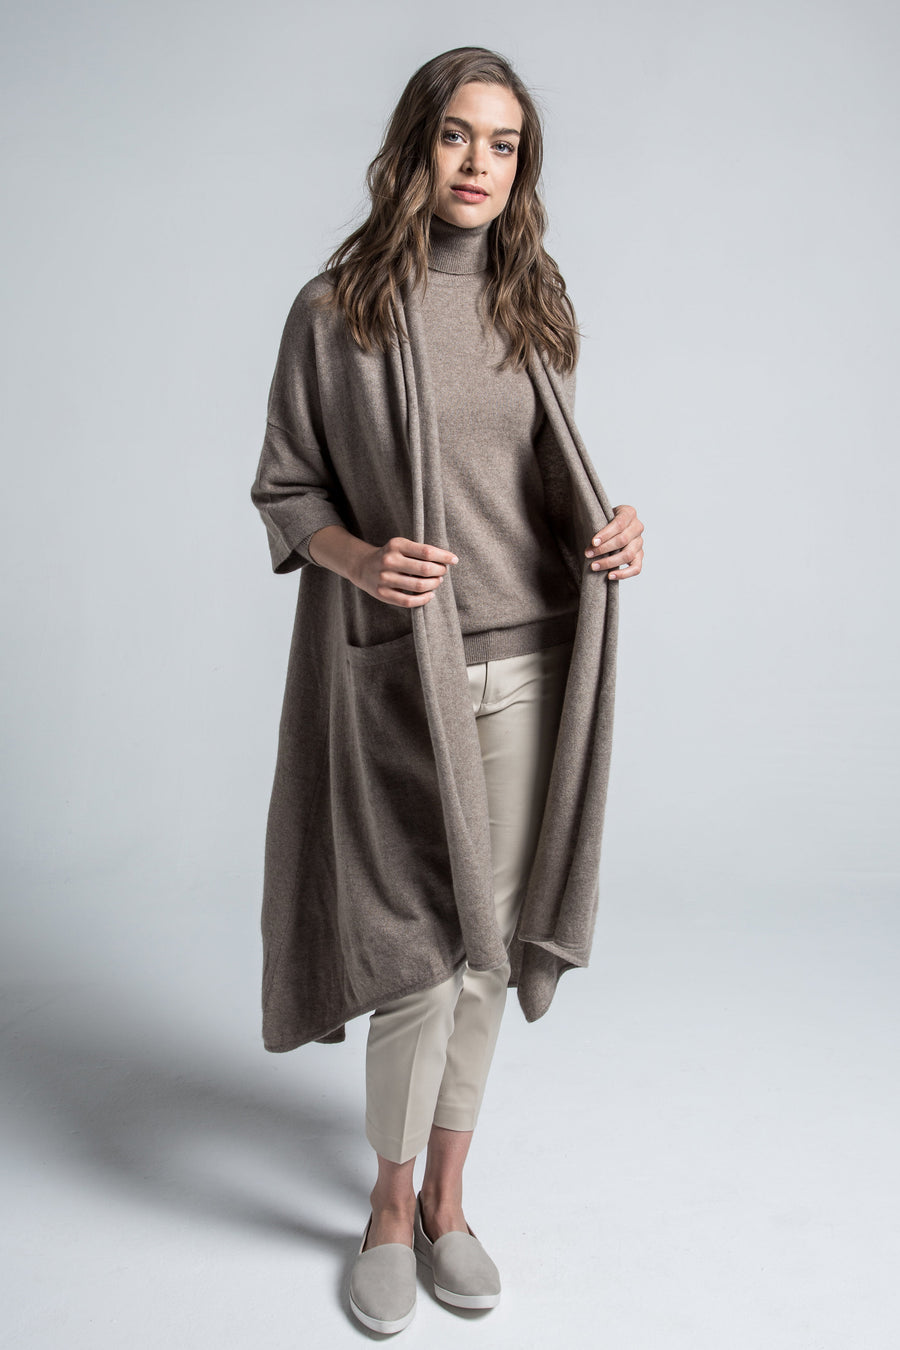 pine cashmere celine women's loose fit 100% pure organic cashmere cardigan coat in brown